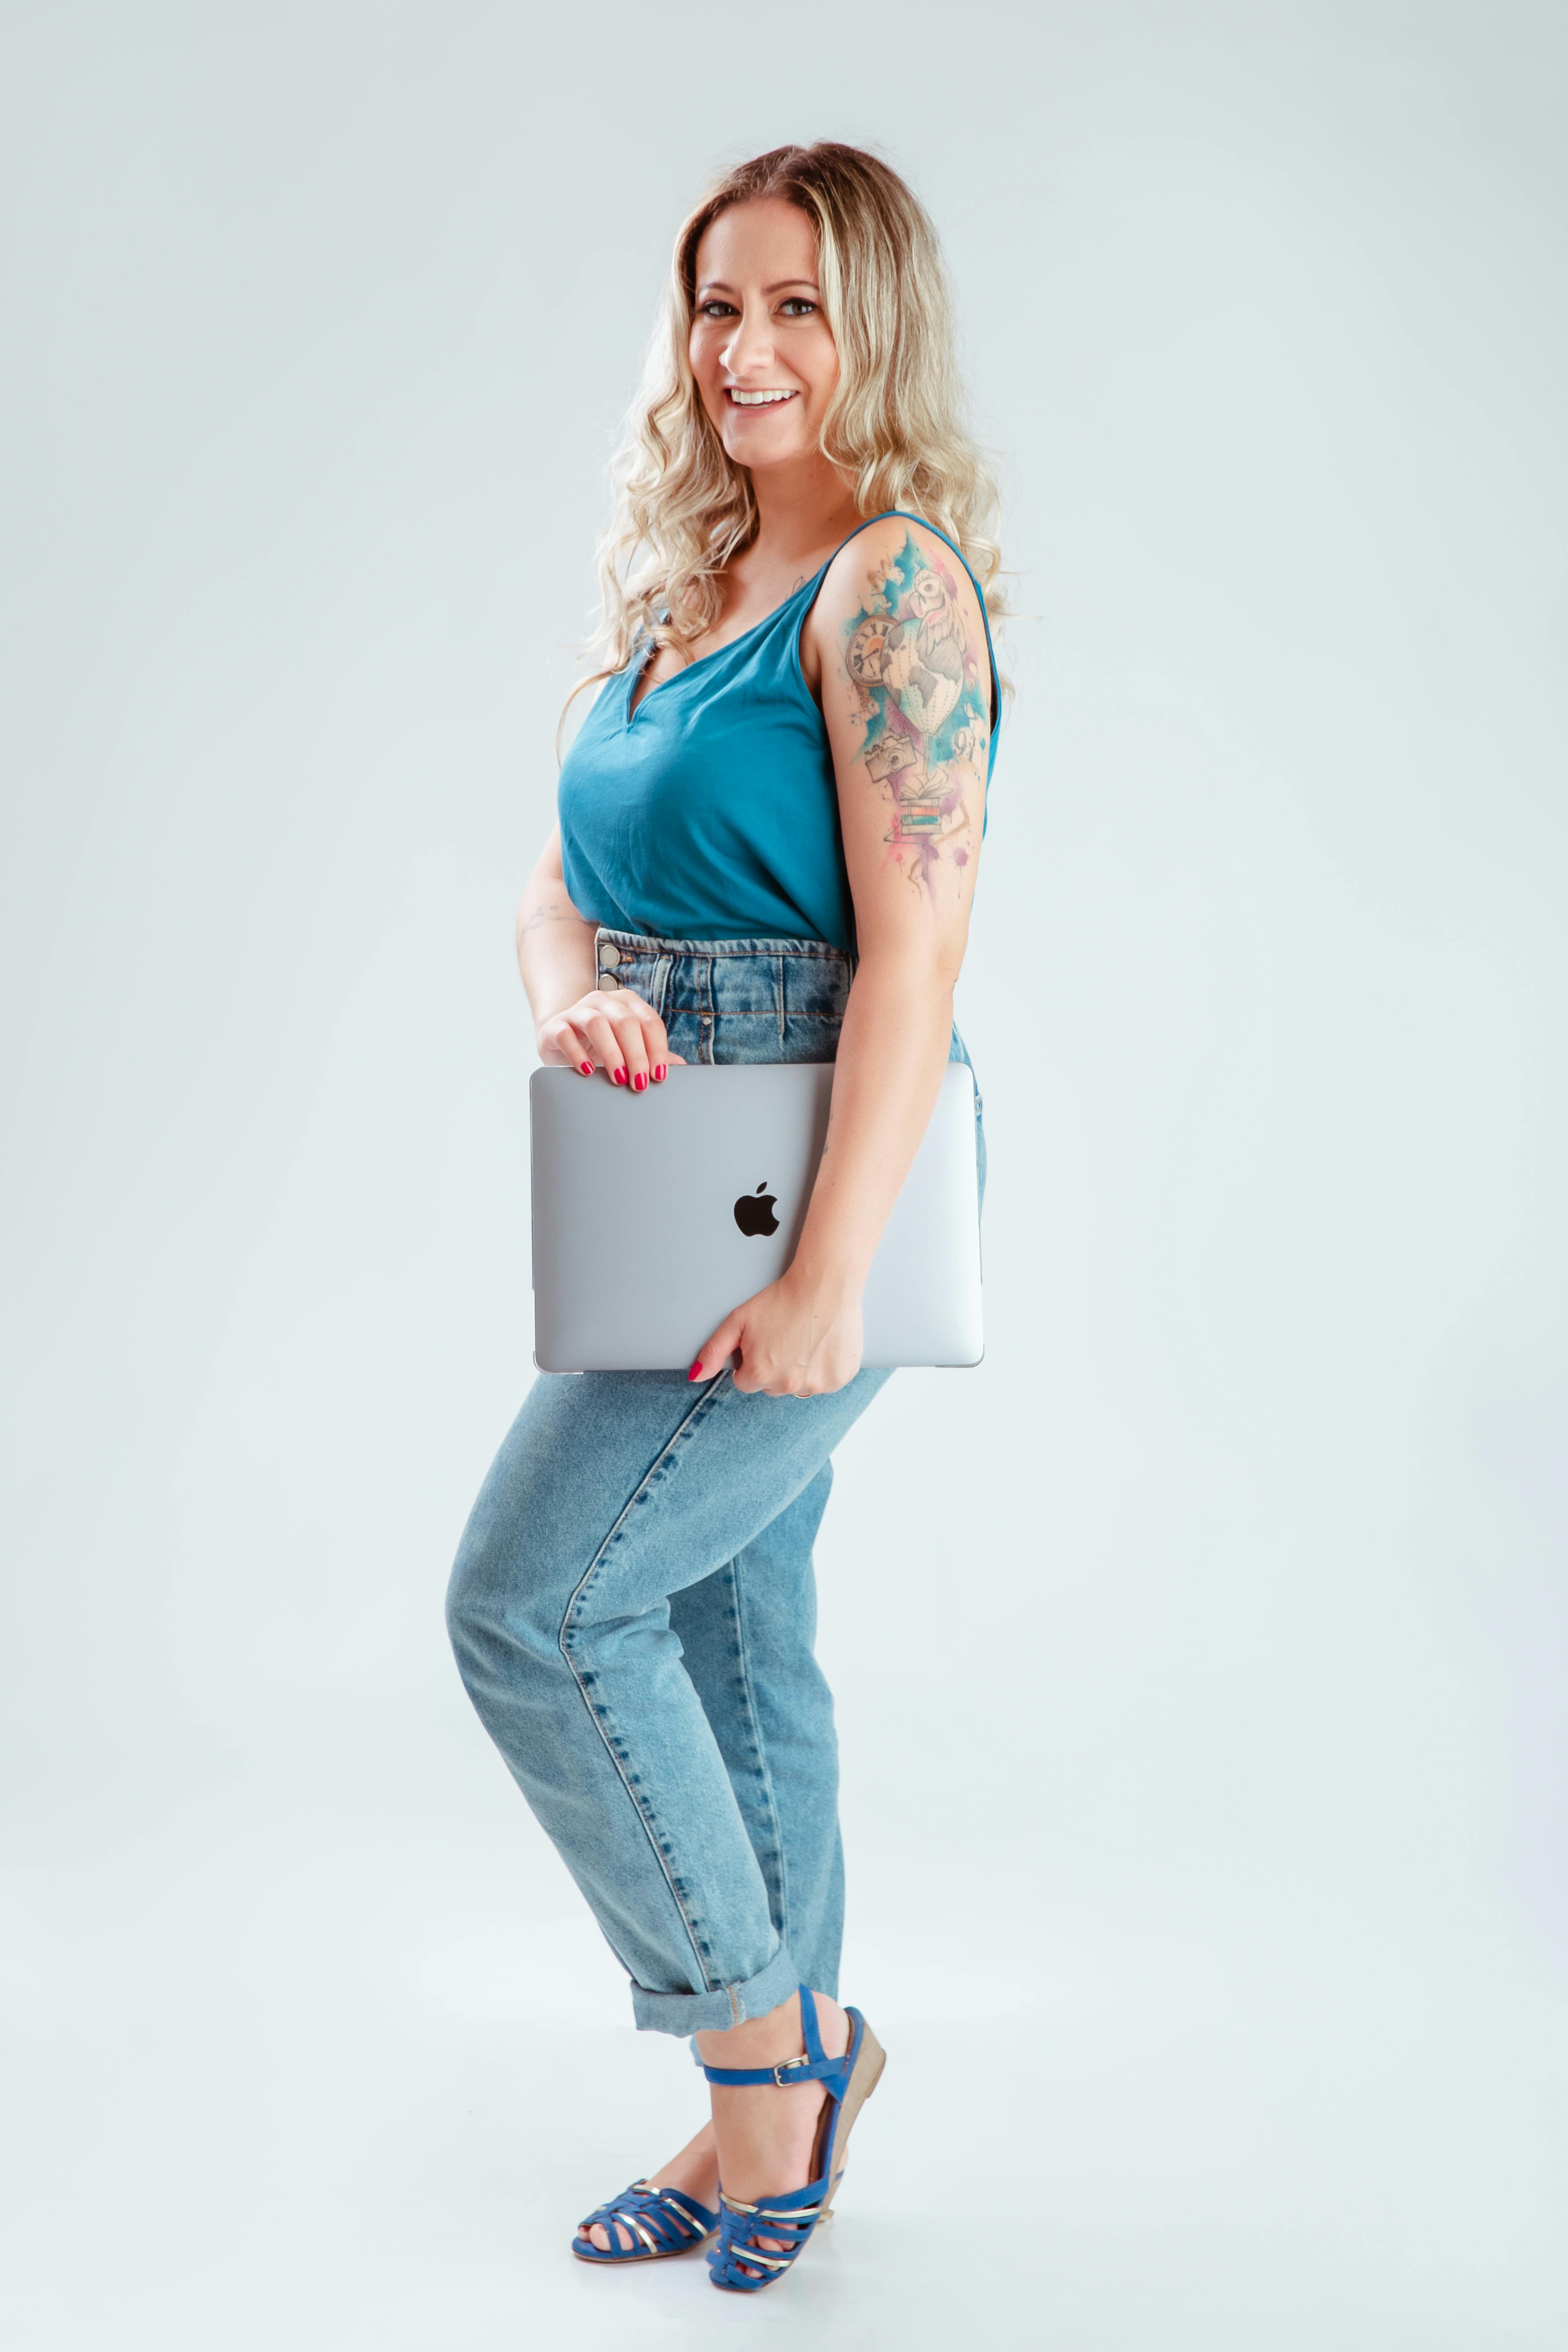 Woman in Black Tank Top and Blue Denim Jeans · Free Stock Photo